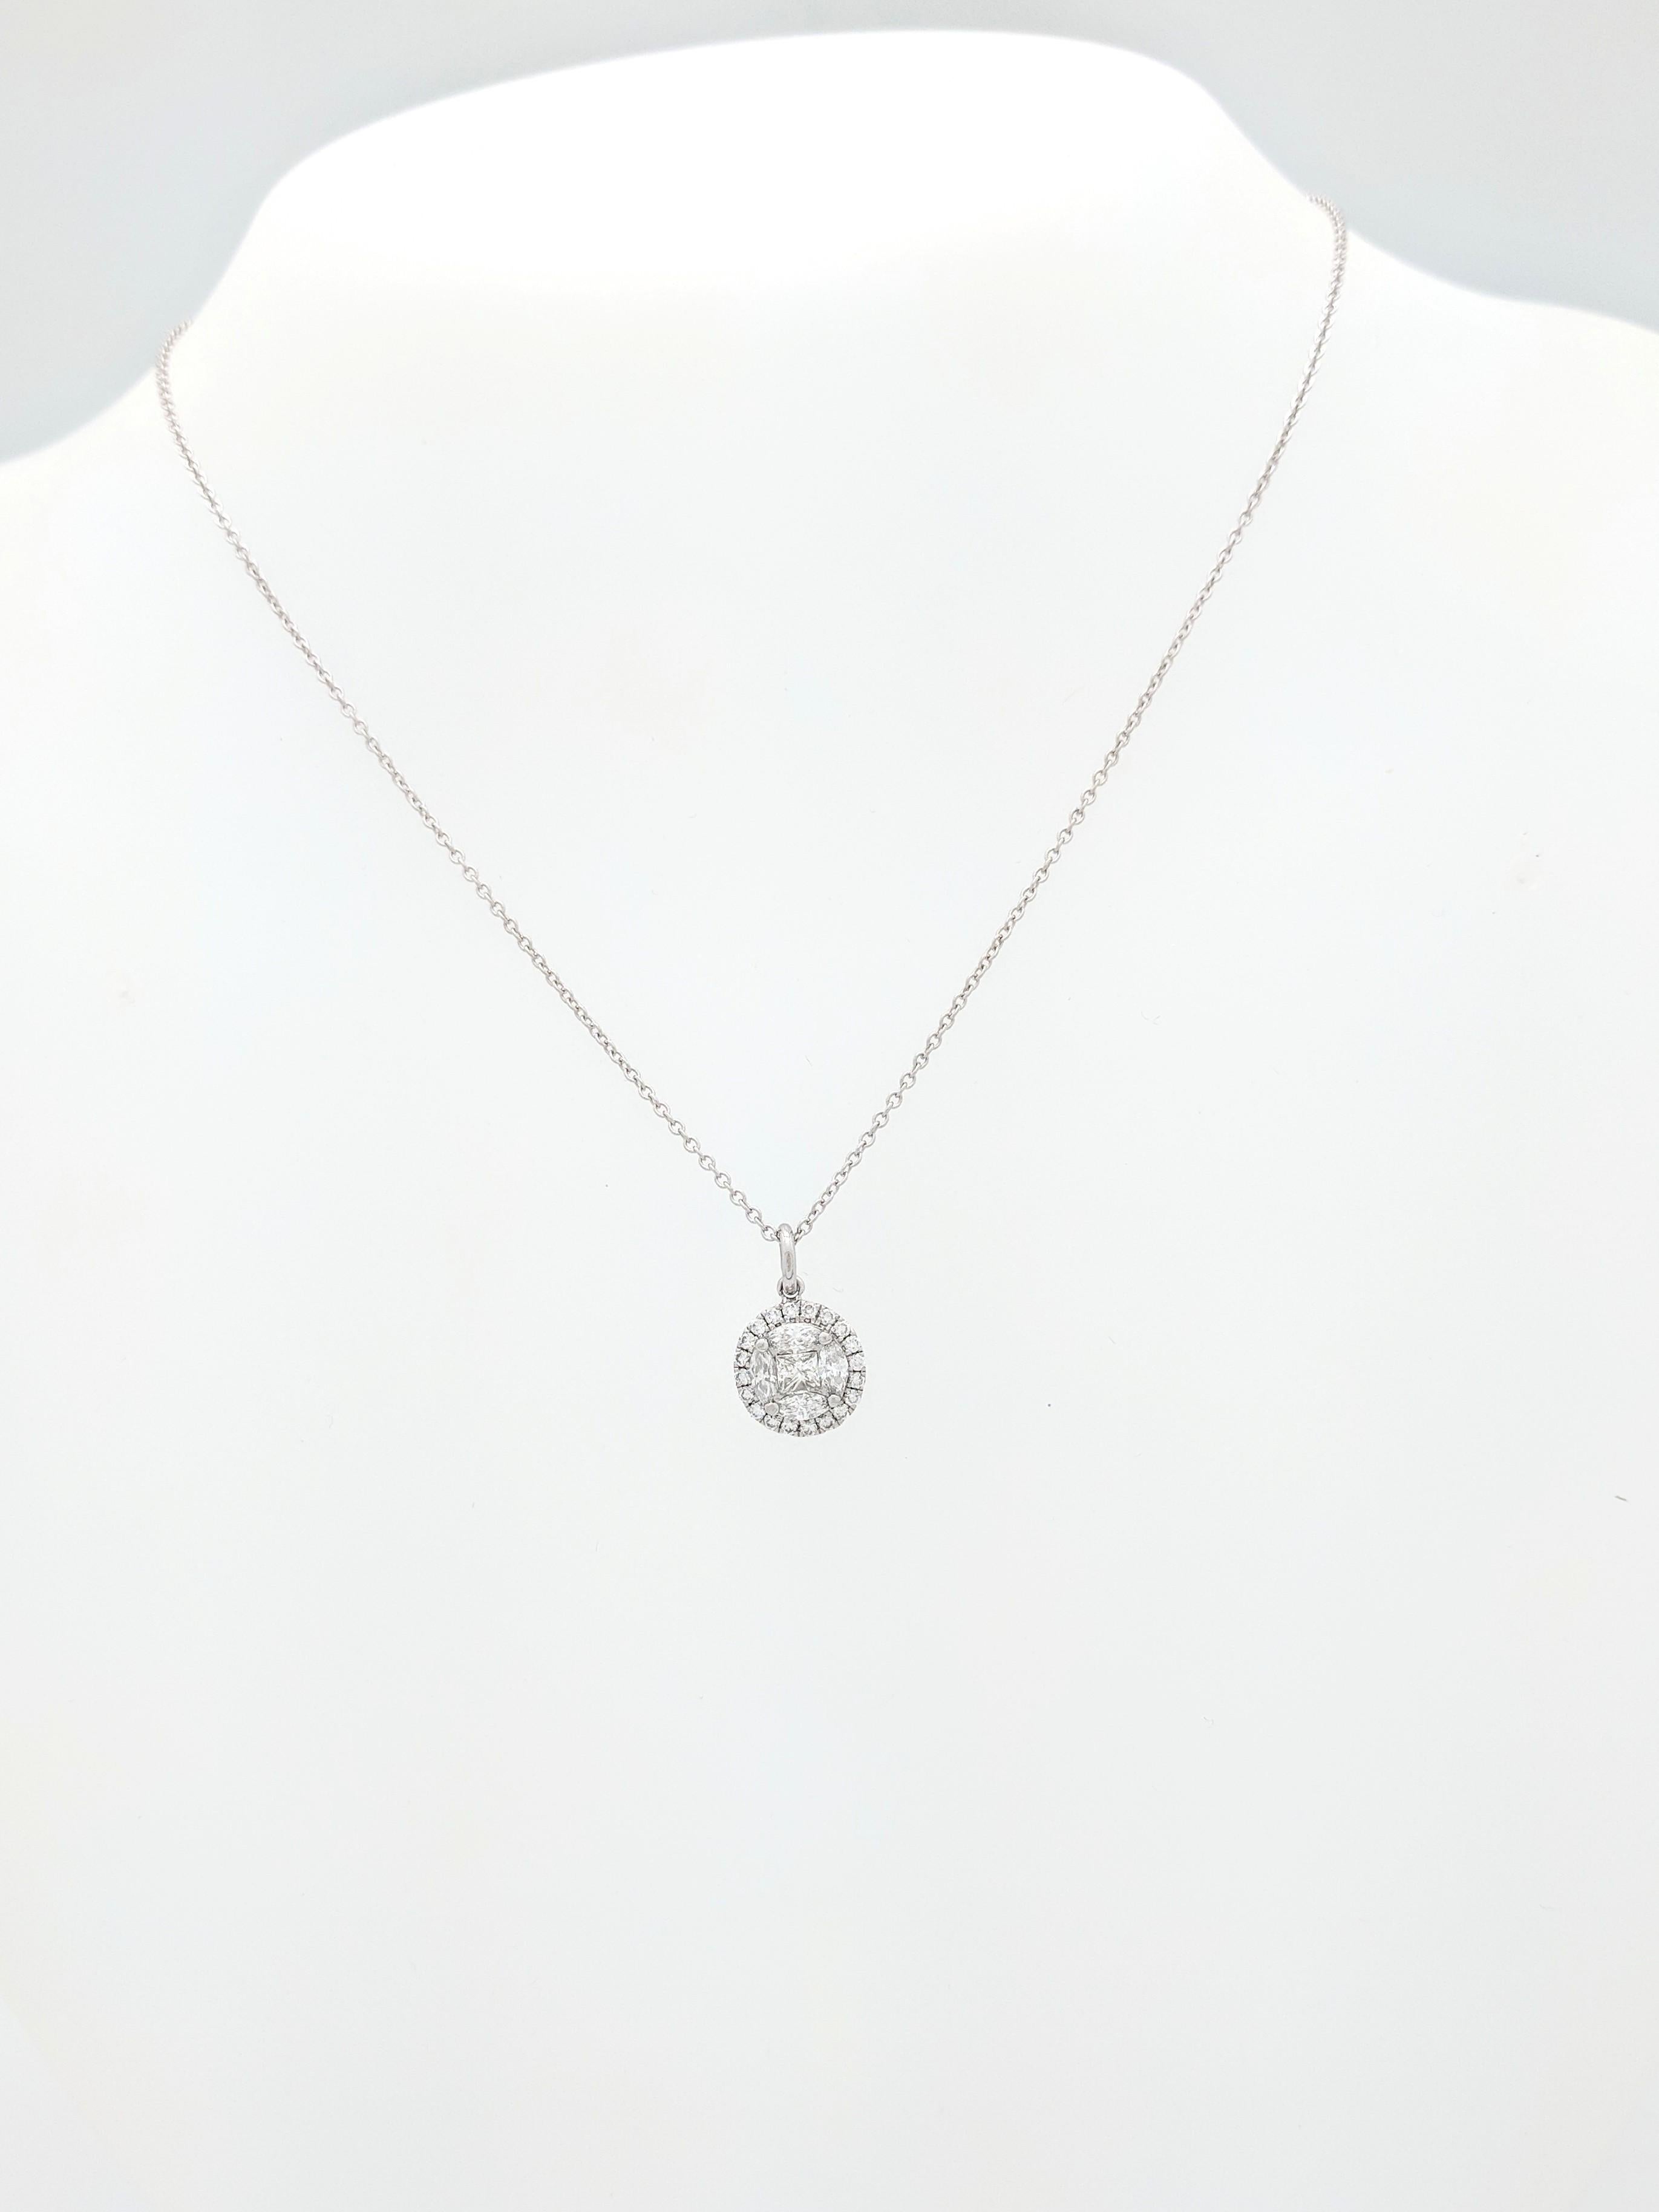 You are viewing a beautiful illusion set halo diamond pendant necklace.

This pendant is crafted from 14k white gold and weighs 2.4 grams. It features approximately (1) .15ct natural princess cut diamond in the center of (4) .10ct natural marquise